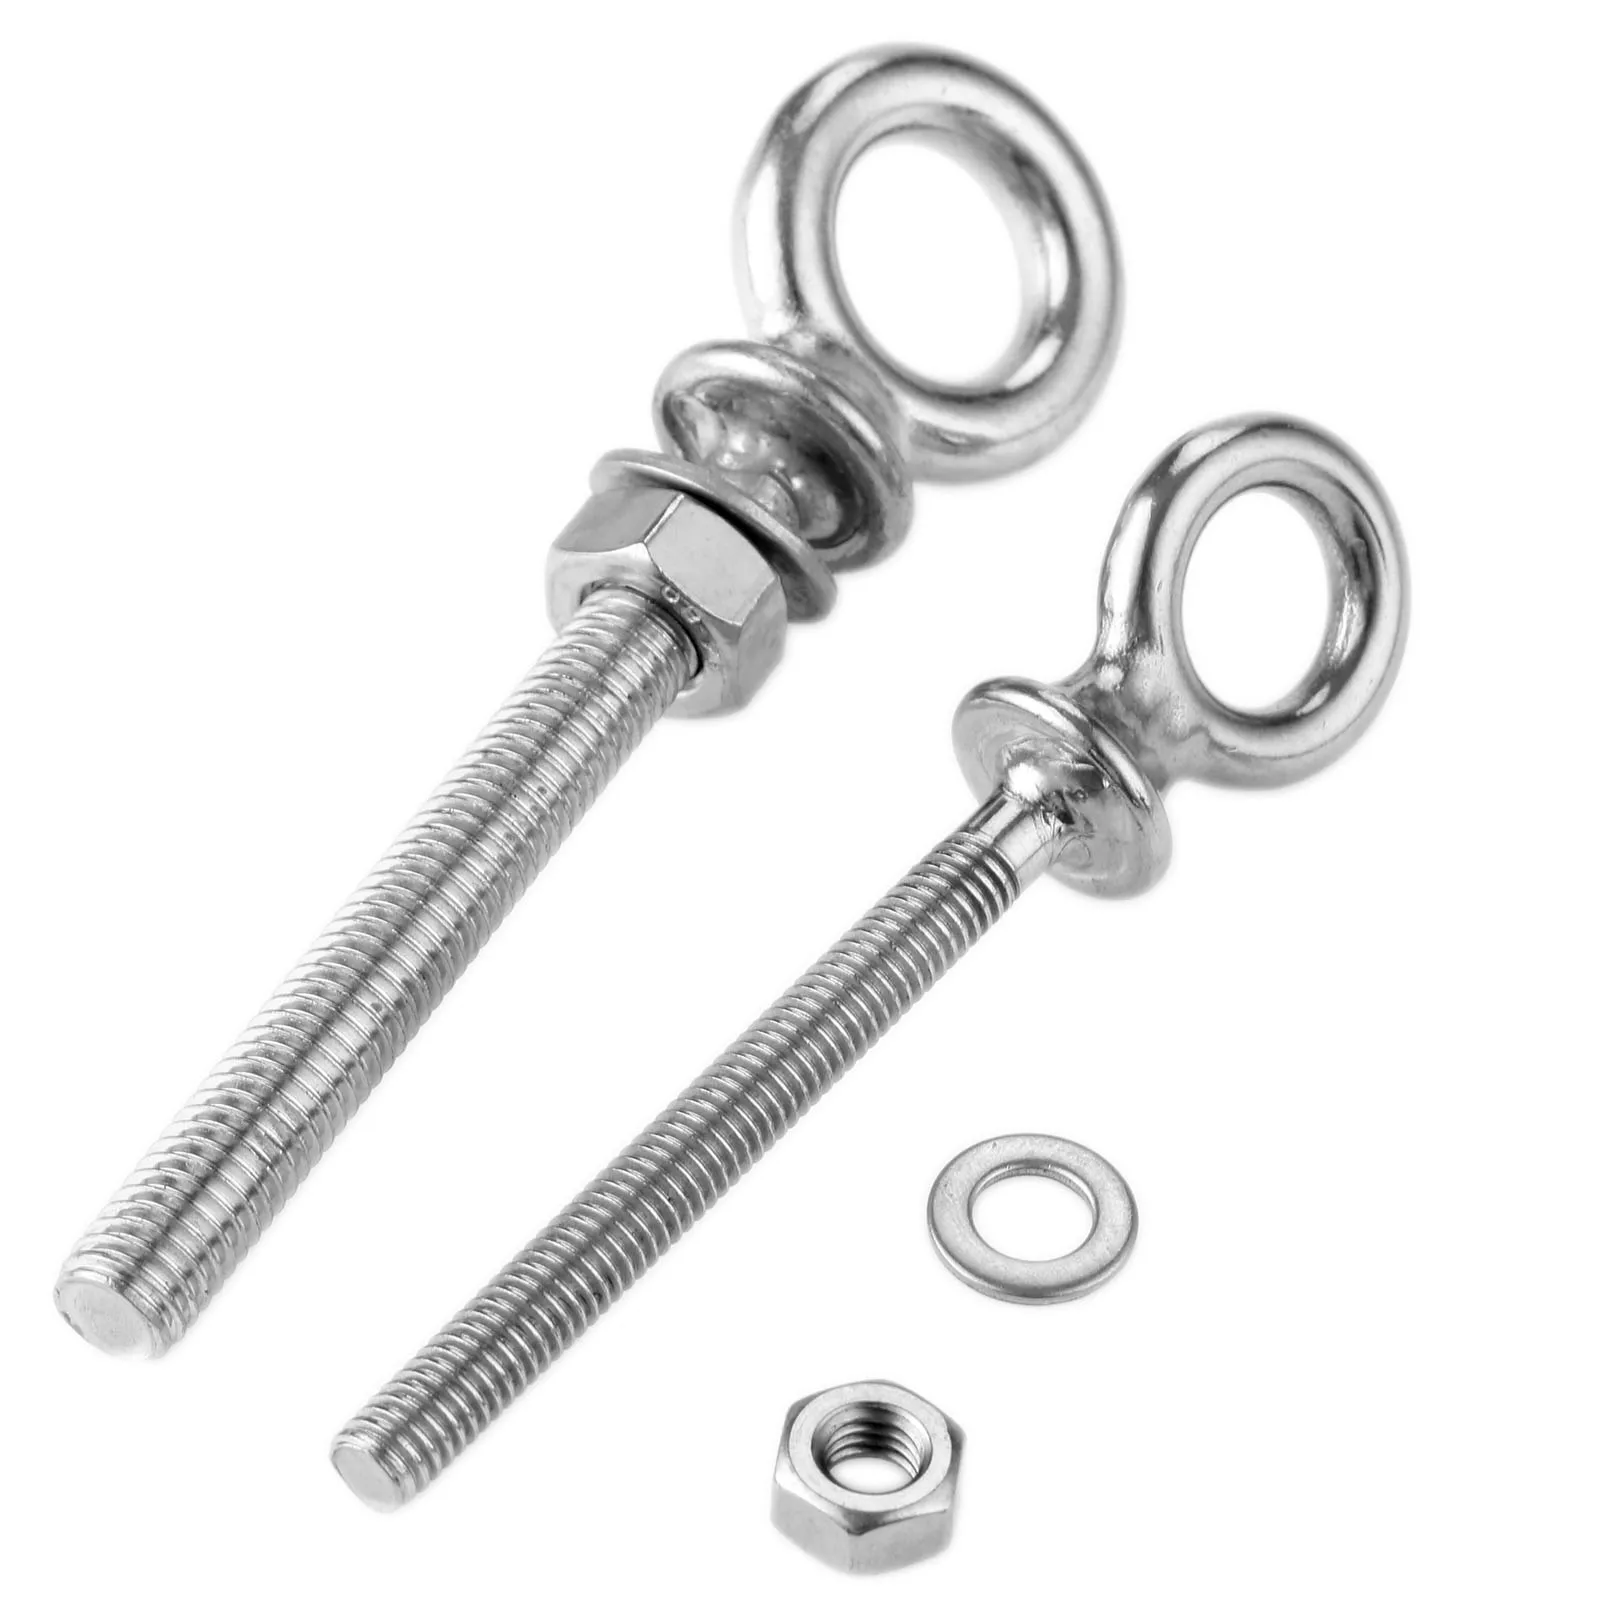 Replace Lifting Eye Bolt with Nut & Washer 316 Stainless Steel M6 M8 M12 Useful